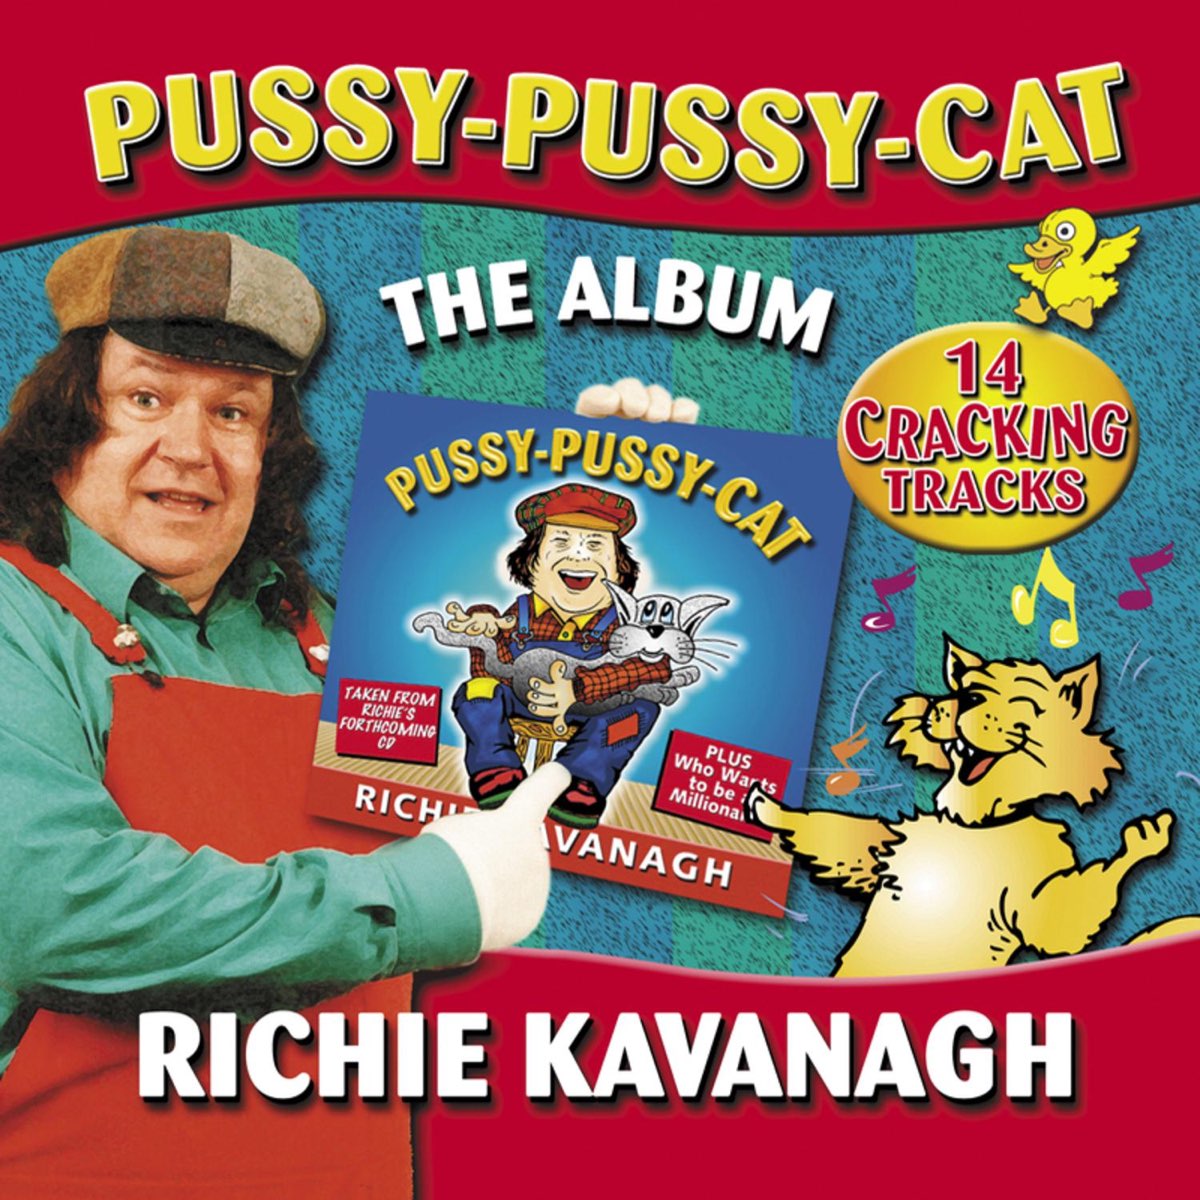 Pussy cat wants to play with pussy